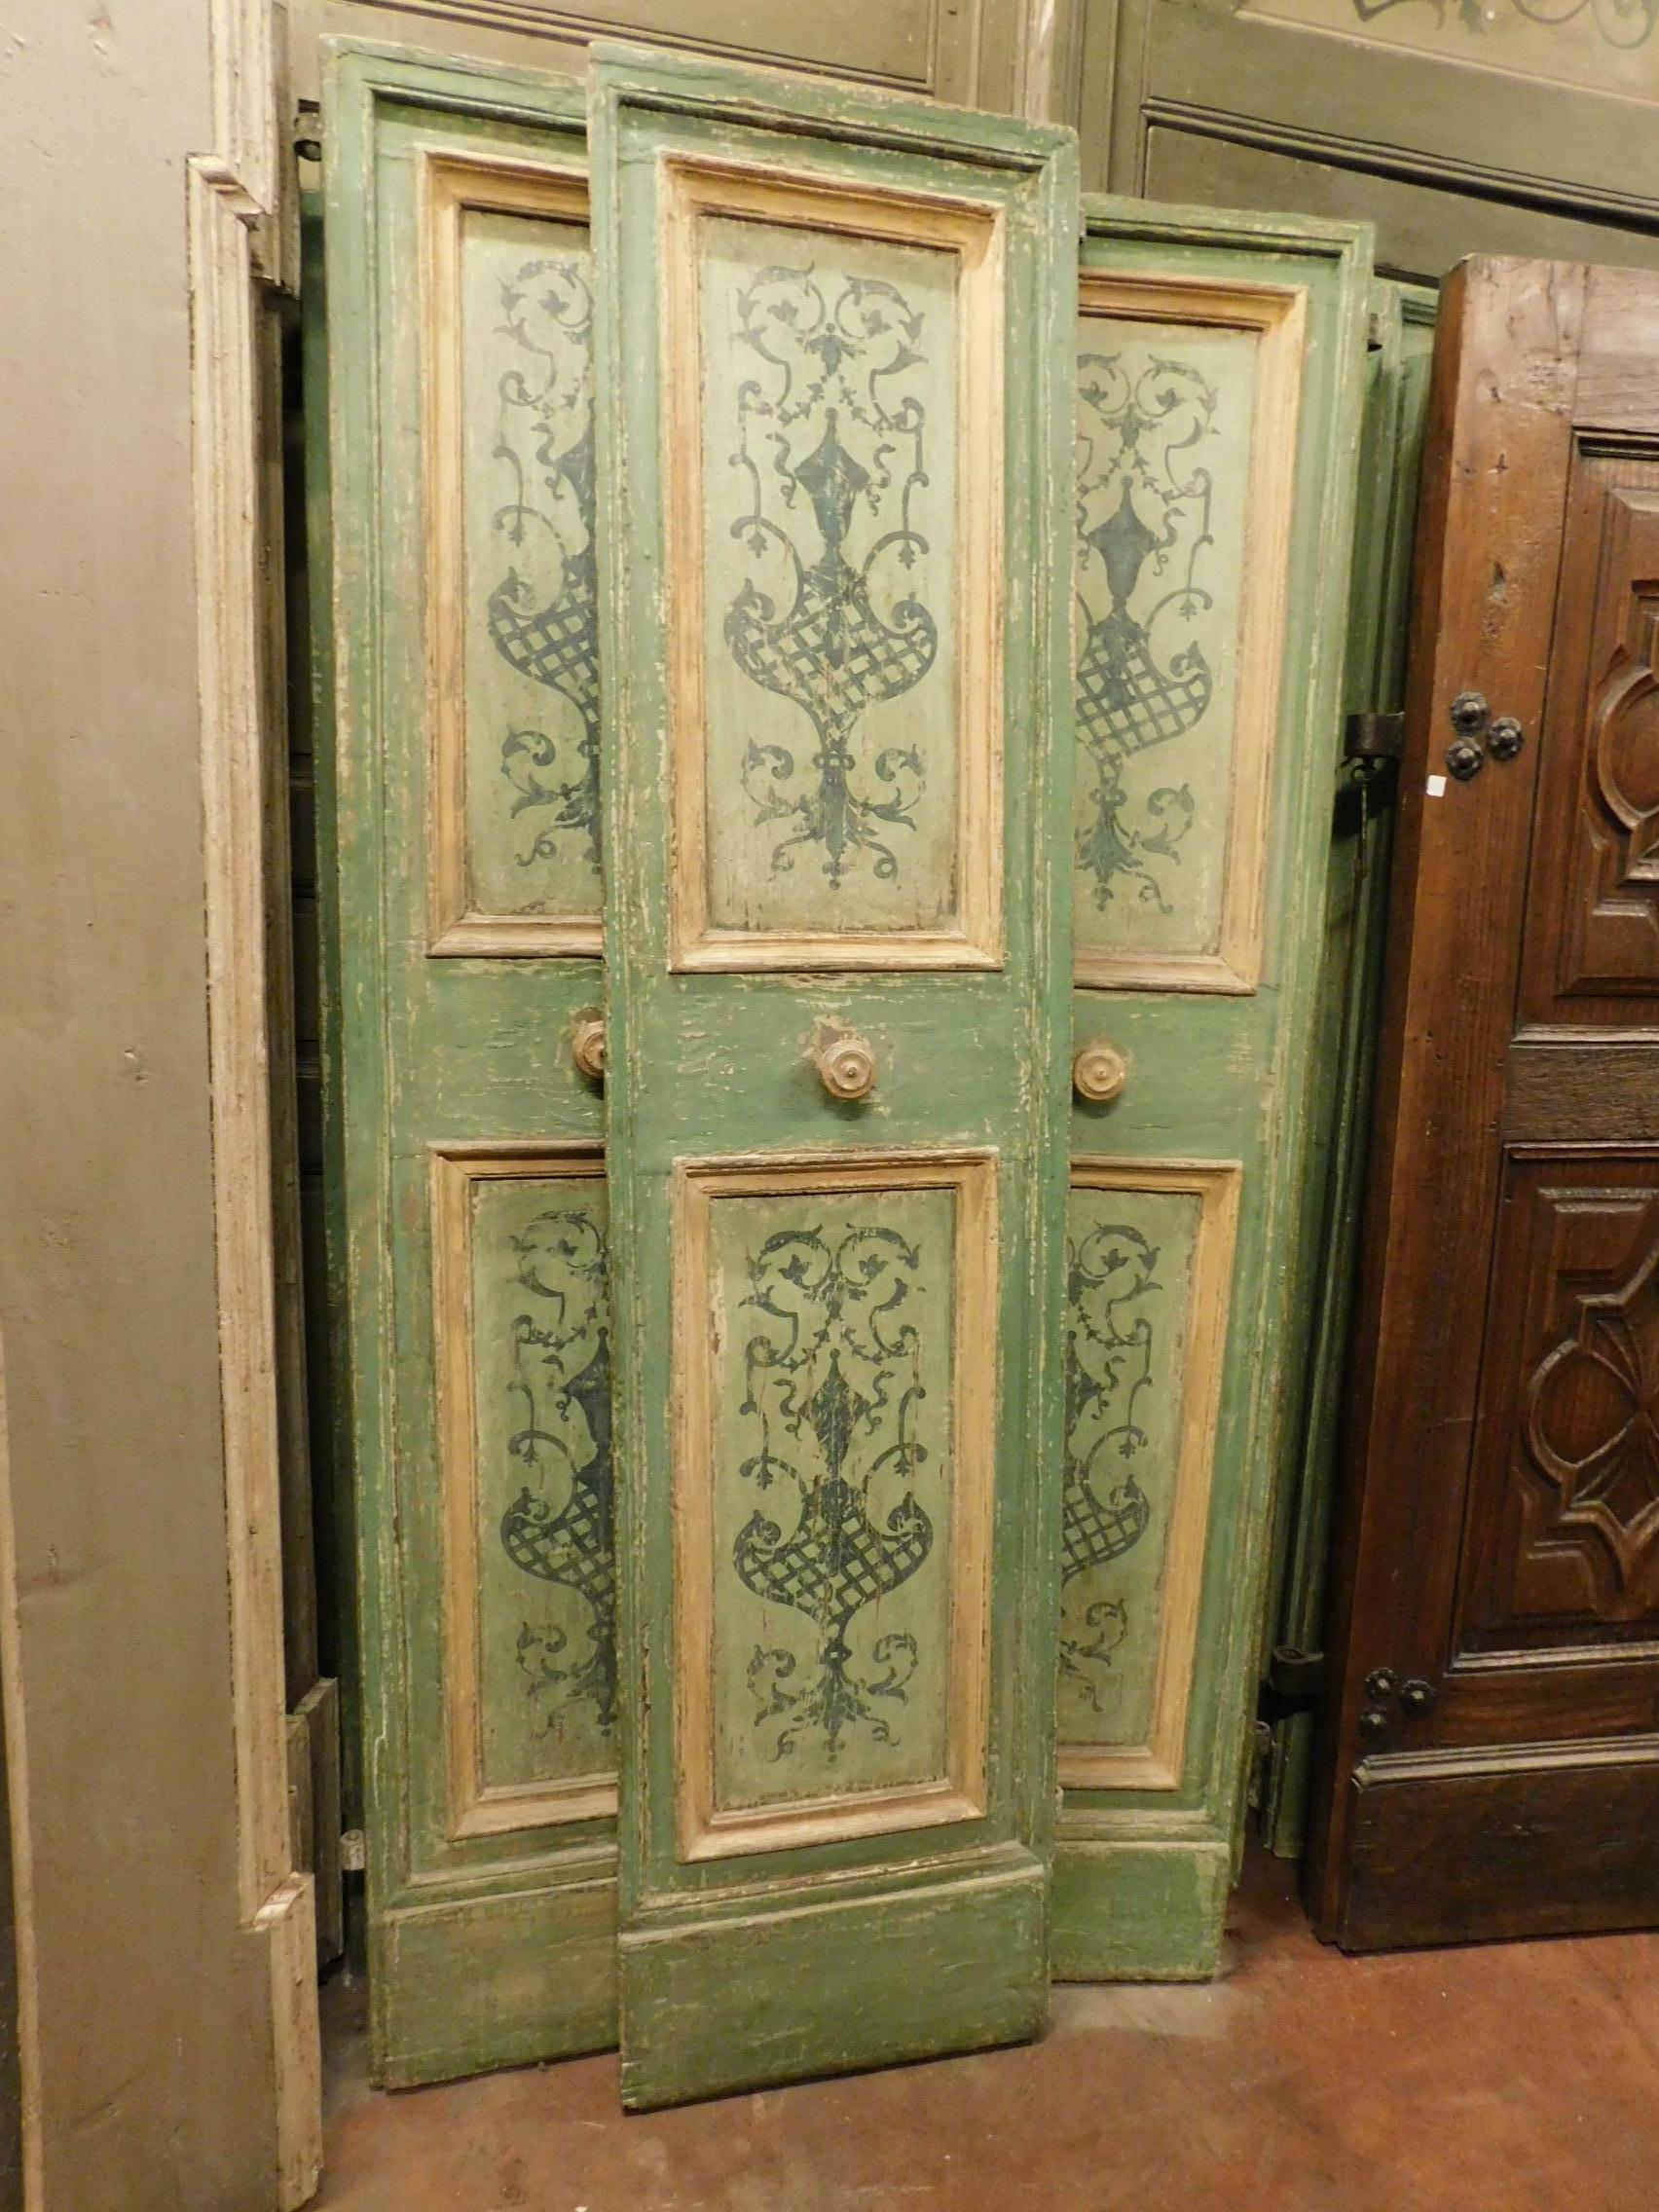 antique double doors, green and yellow, hand painted, coming from the nobles' house in central Italy, lacquer and original tools, were mounted directly on the wall, without frame, smooth back but green lacquered.
We have 1 double doors available